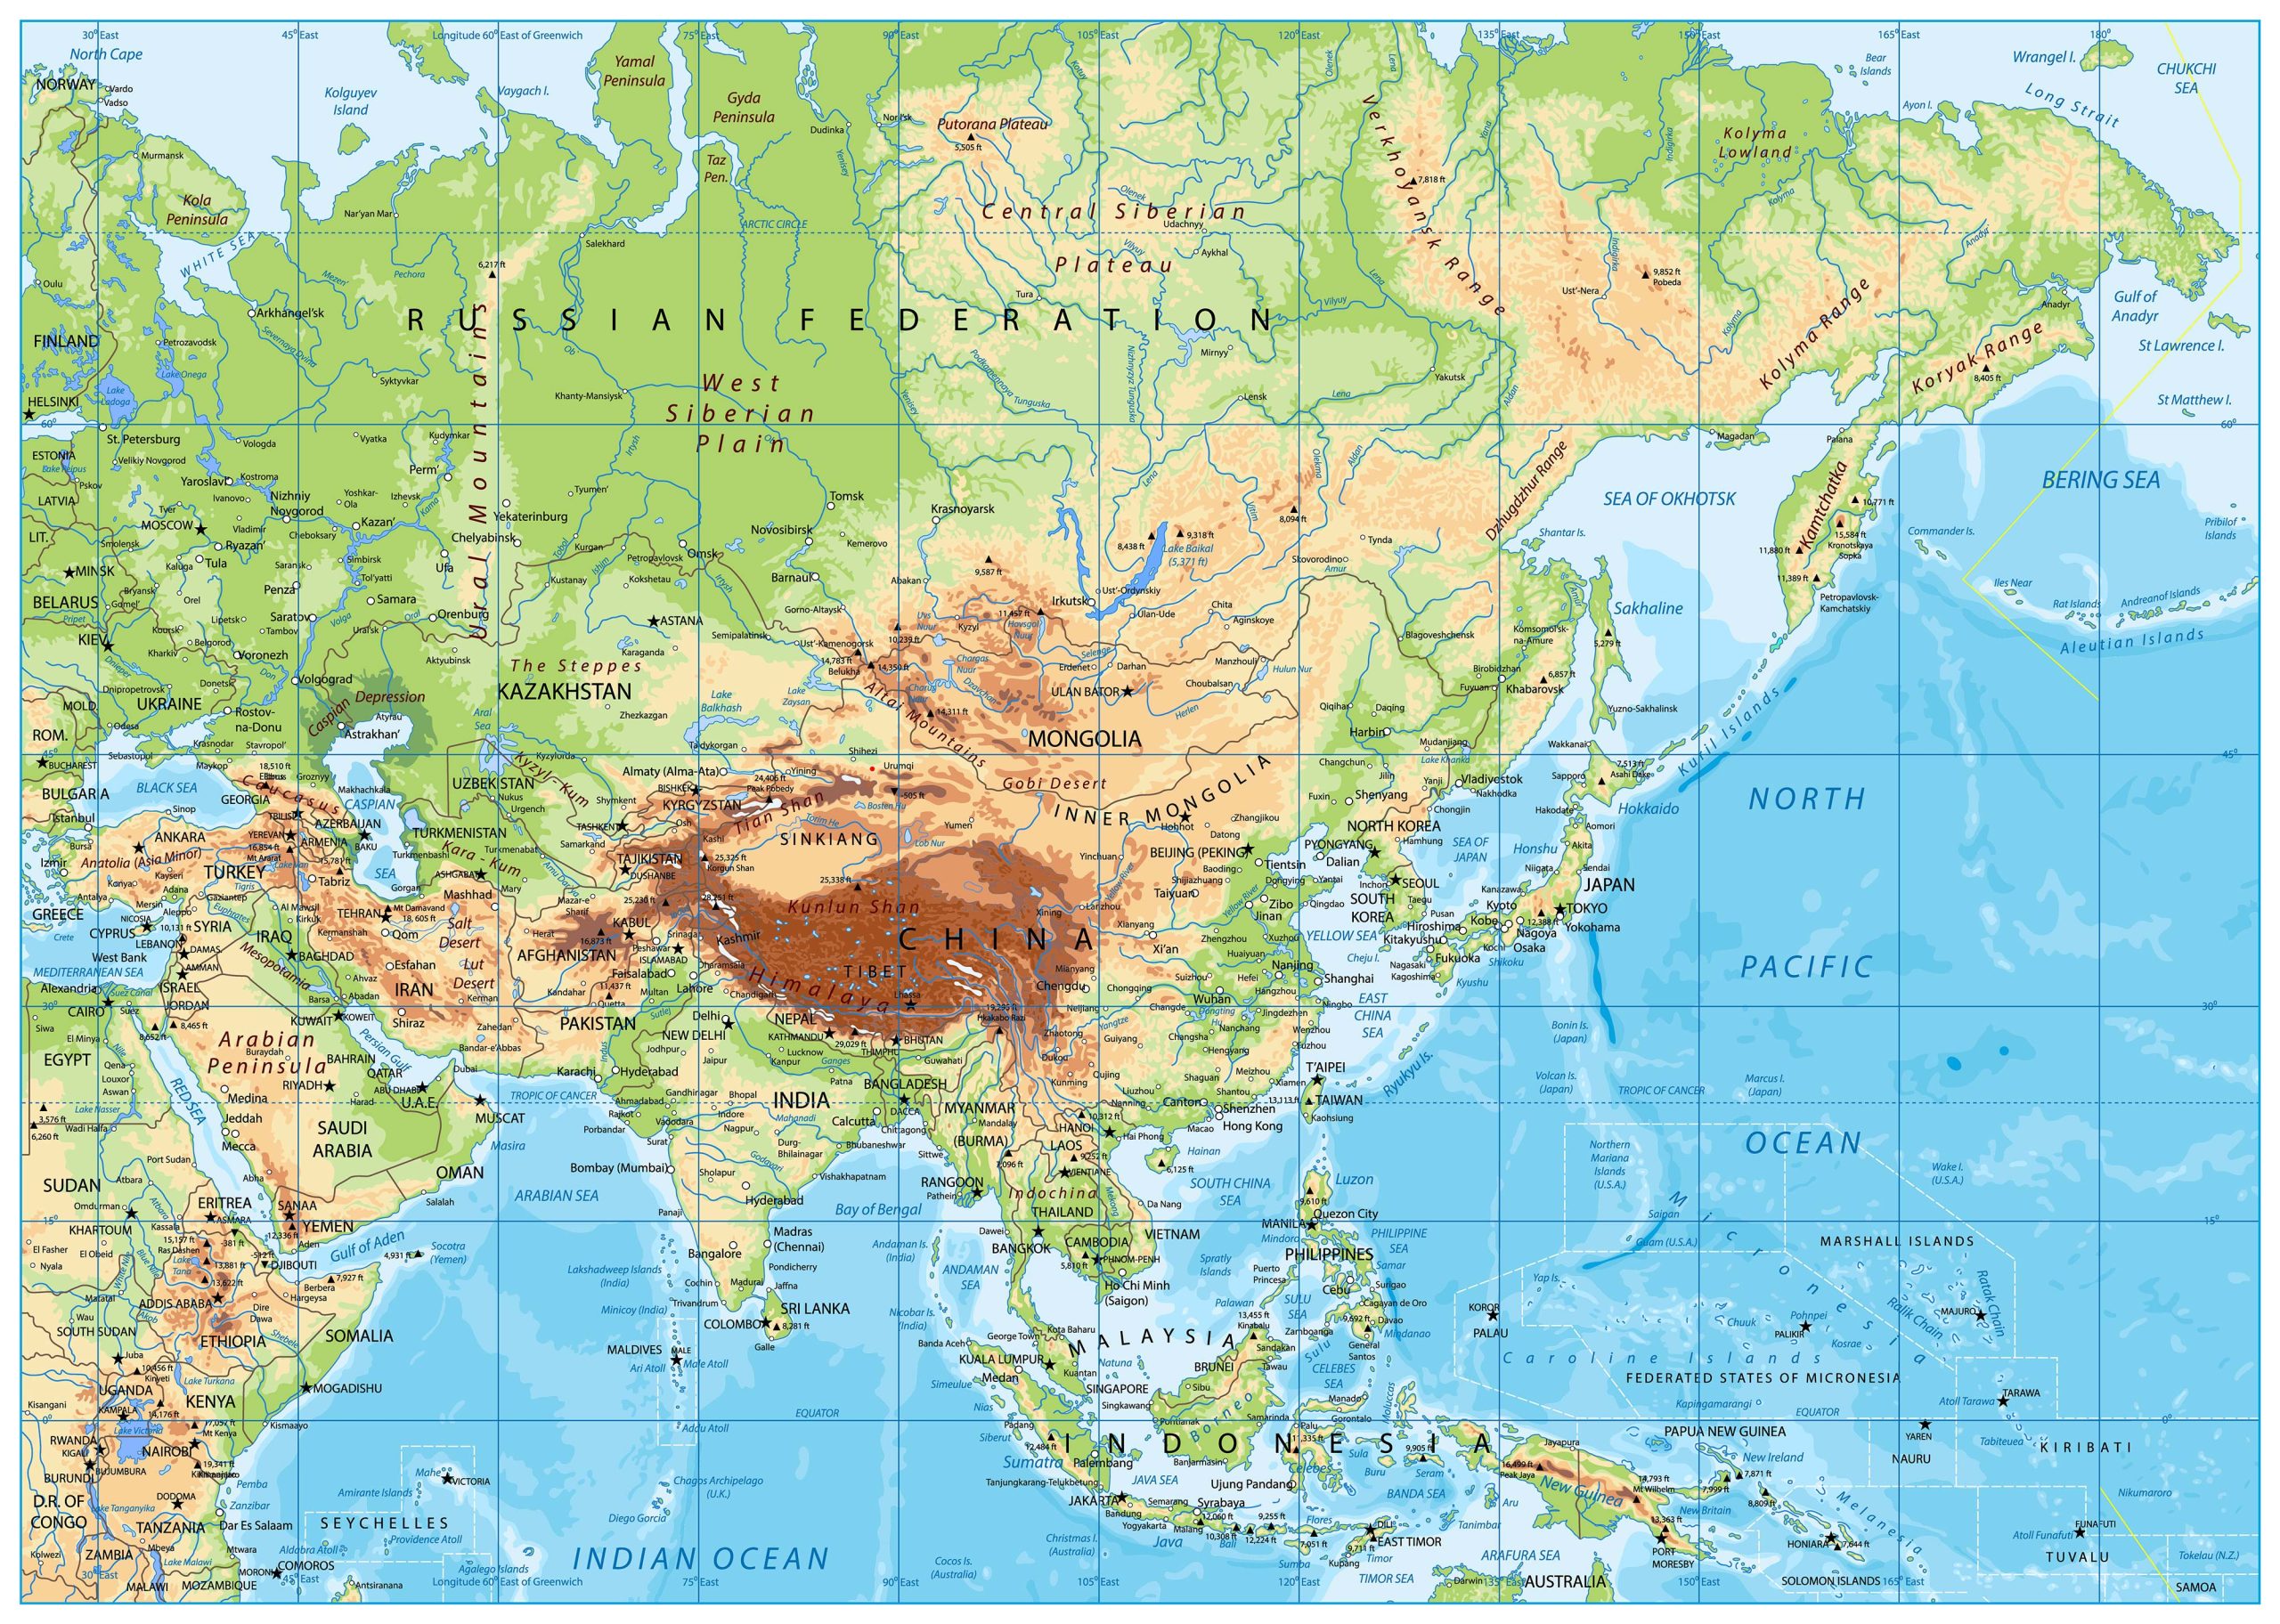 Asia Physical Map